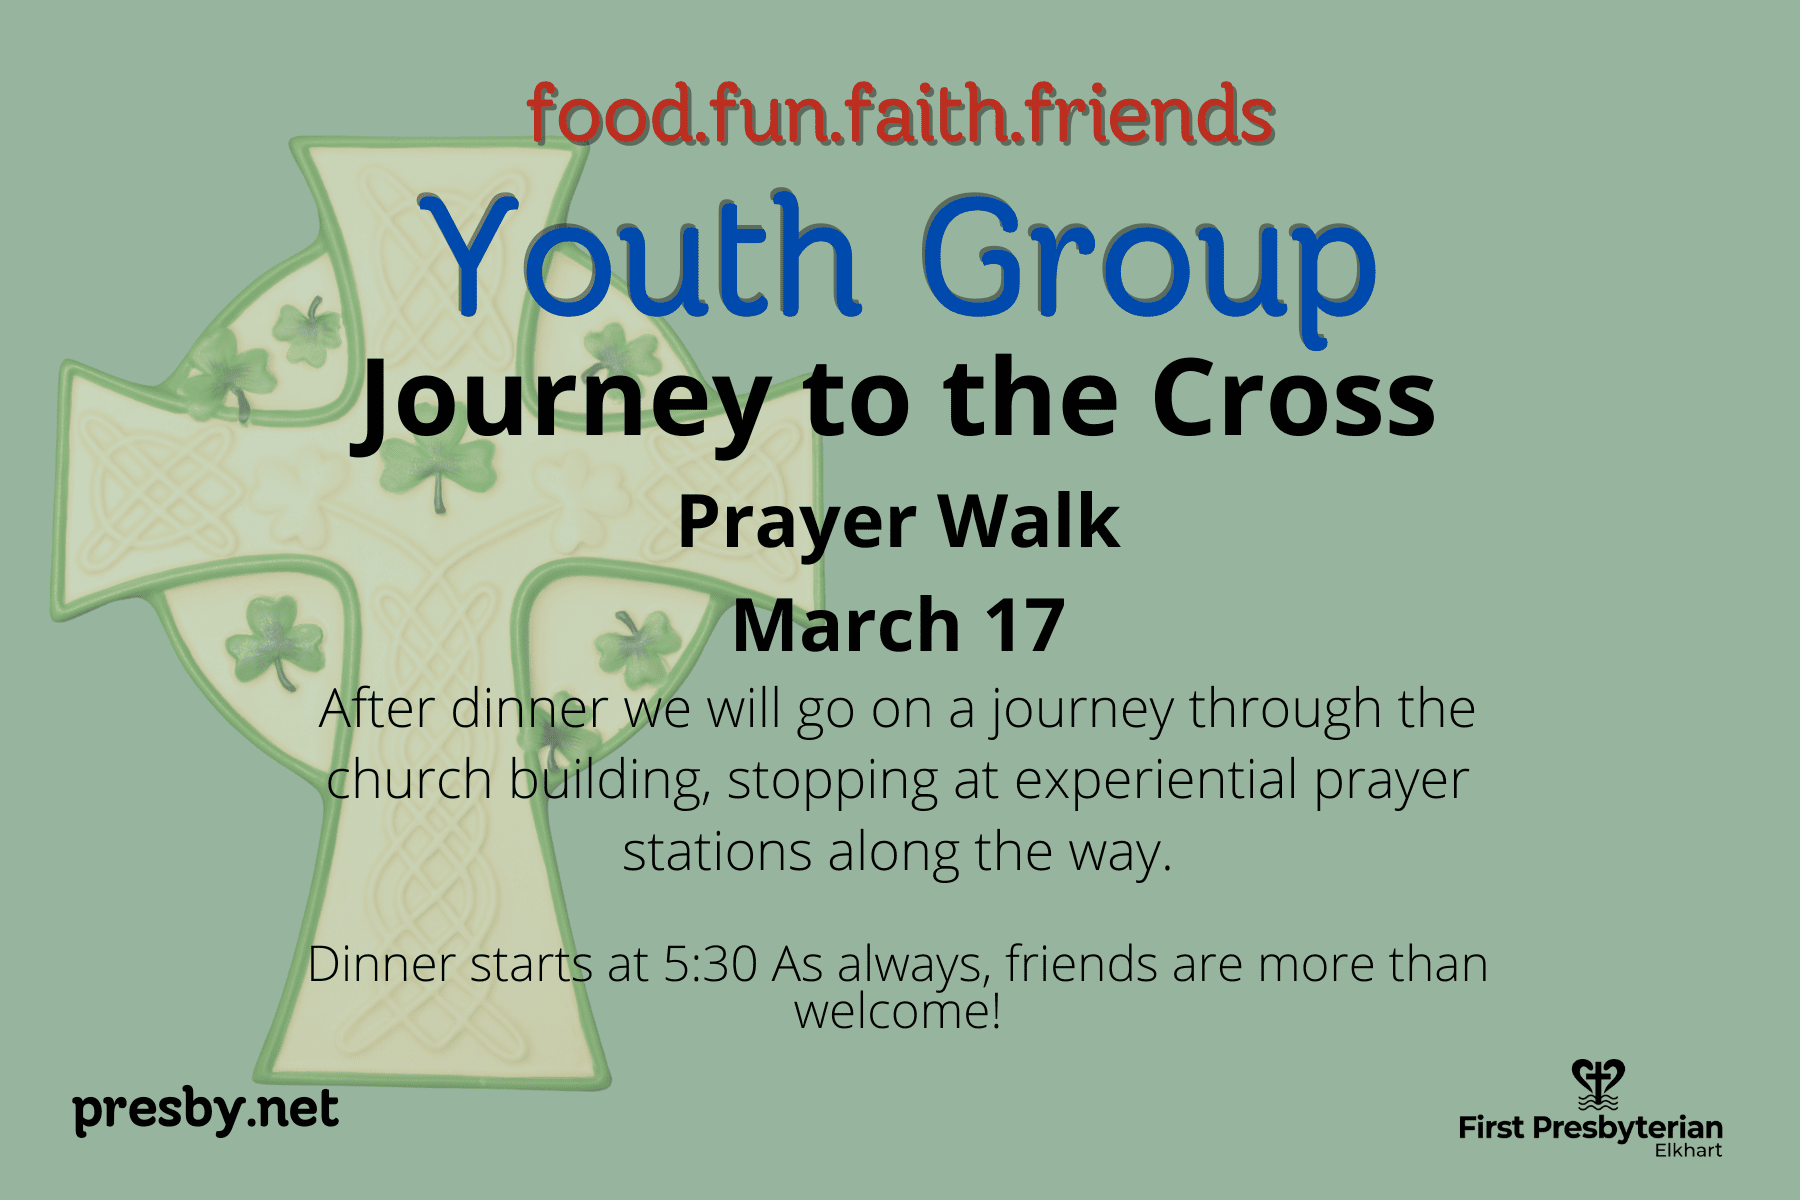 Information for March 17 youth group